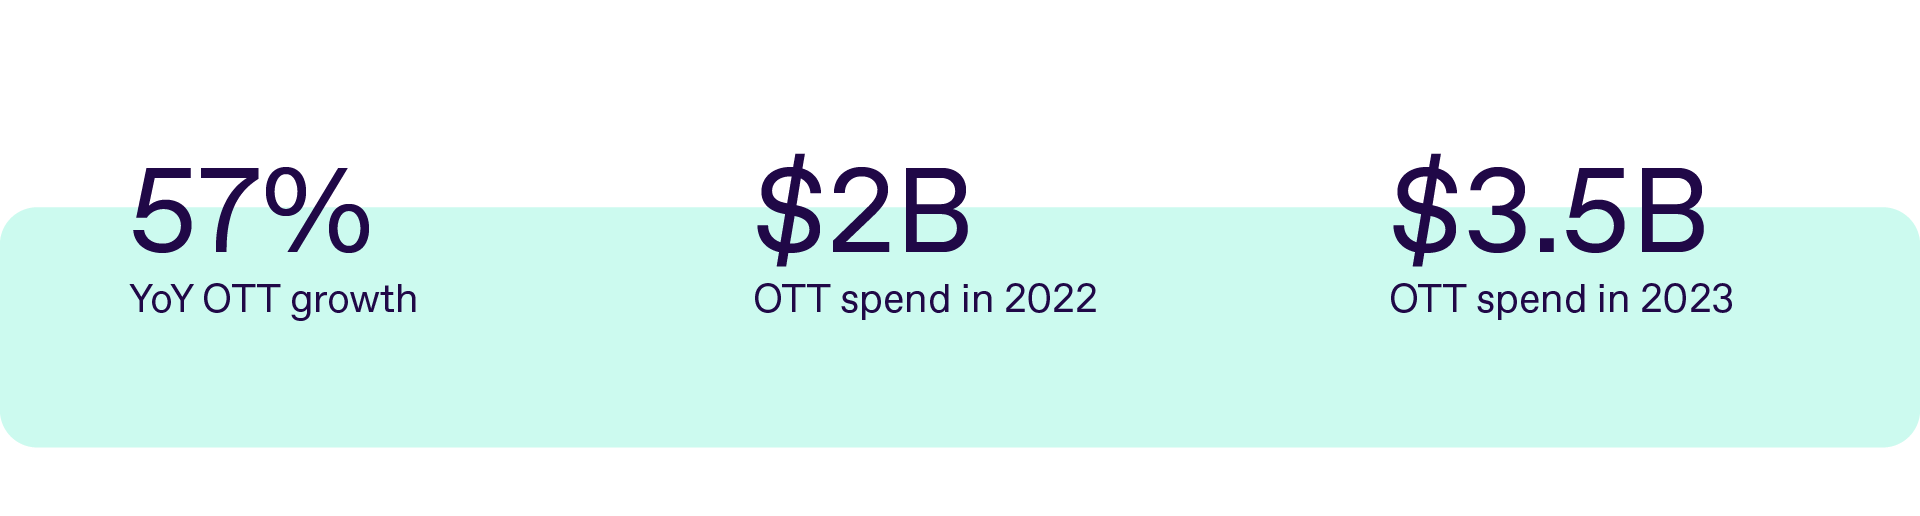 Graphic showing stats including 57% YOY OTT growth, $2B OTT spend in 2022, and $3.5B OTT spend in 2023